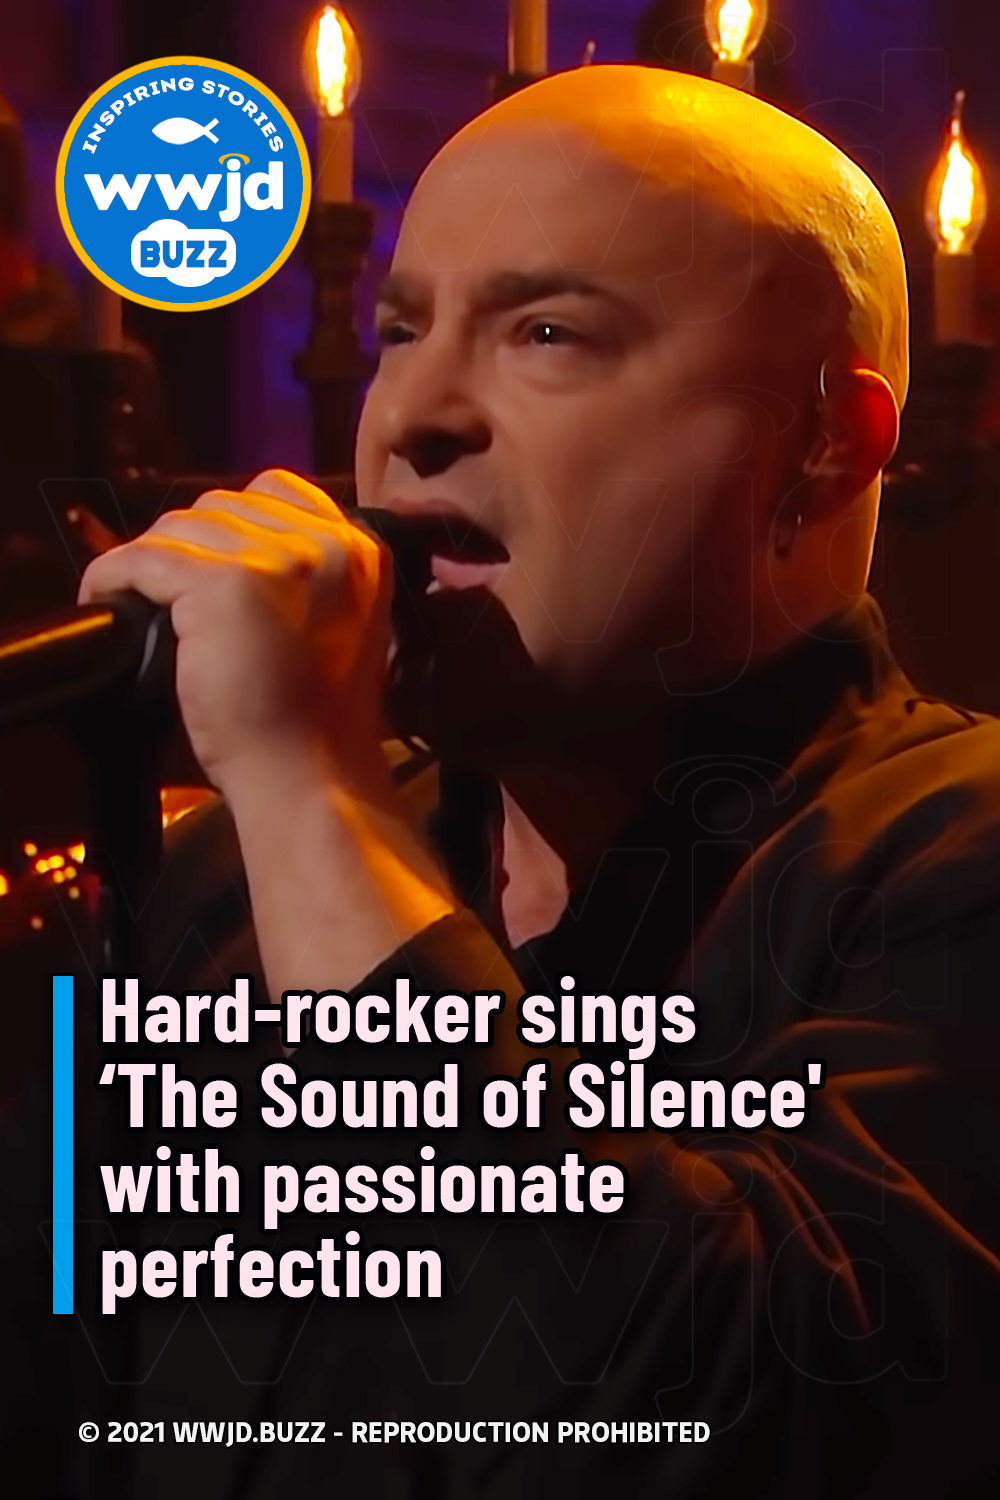 Hard-rocker sings ‘The Sound of Silence\' with passionate perfection